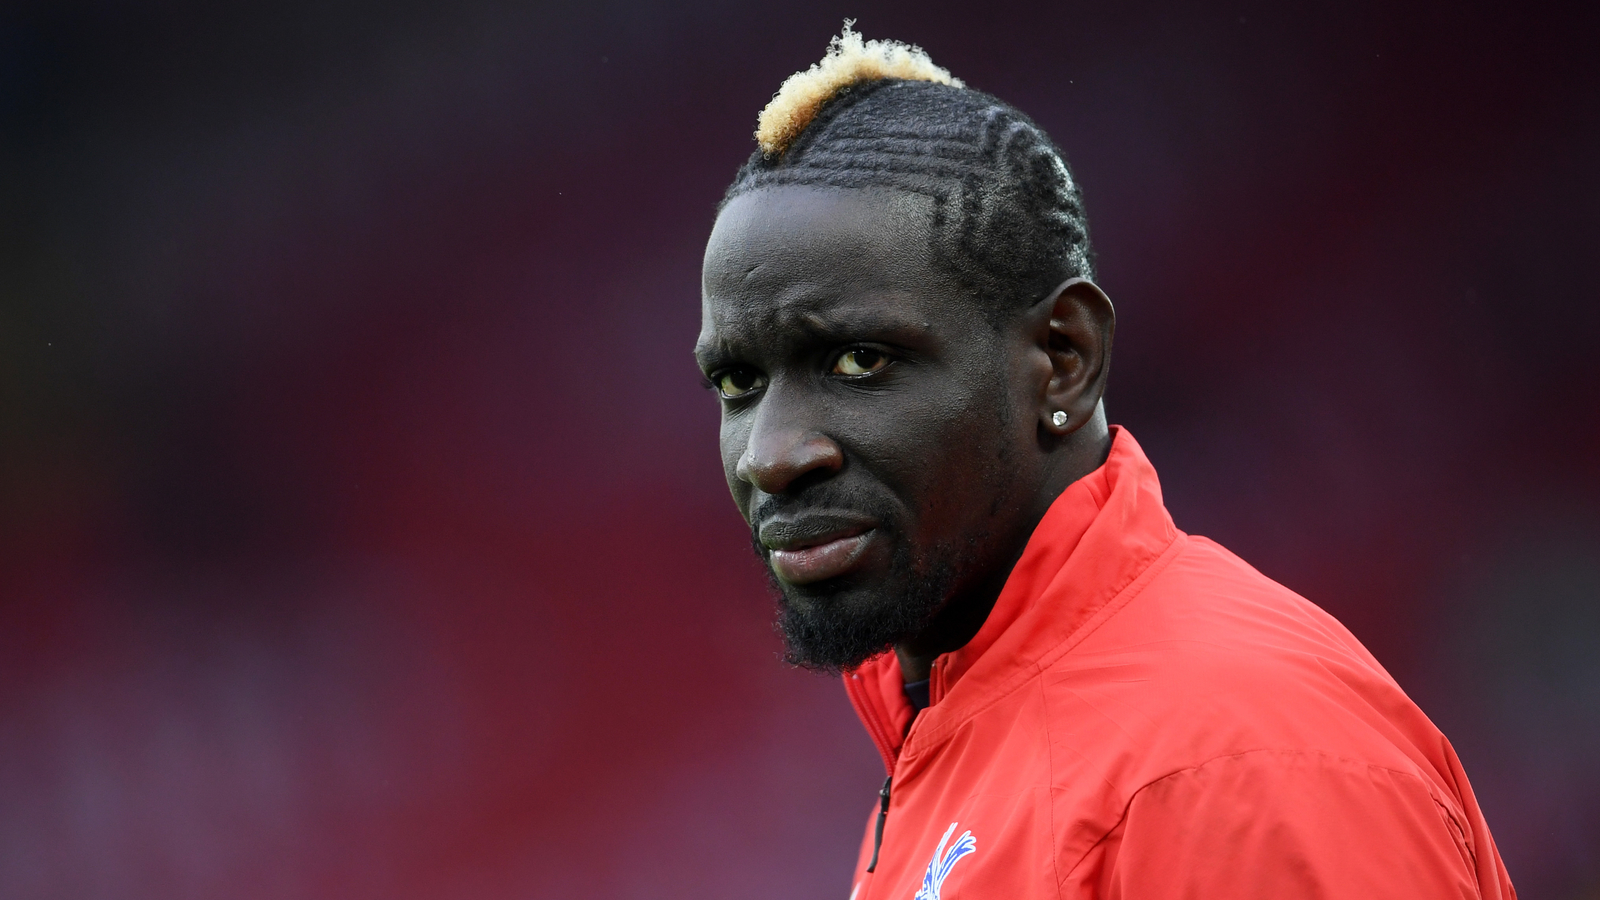 Former PSG and Liverpool Player, Mamadou Sakho, Involved in Violent Incident at HSC Montpellier: Will this be the end of his career?